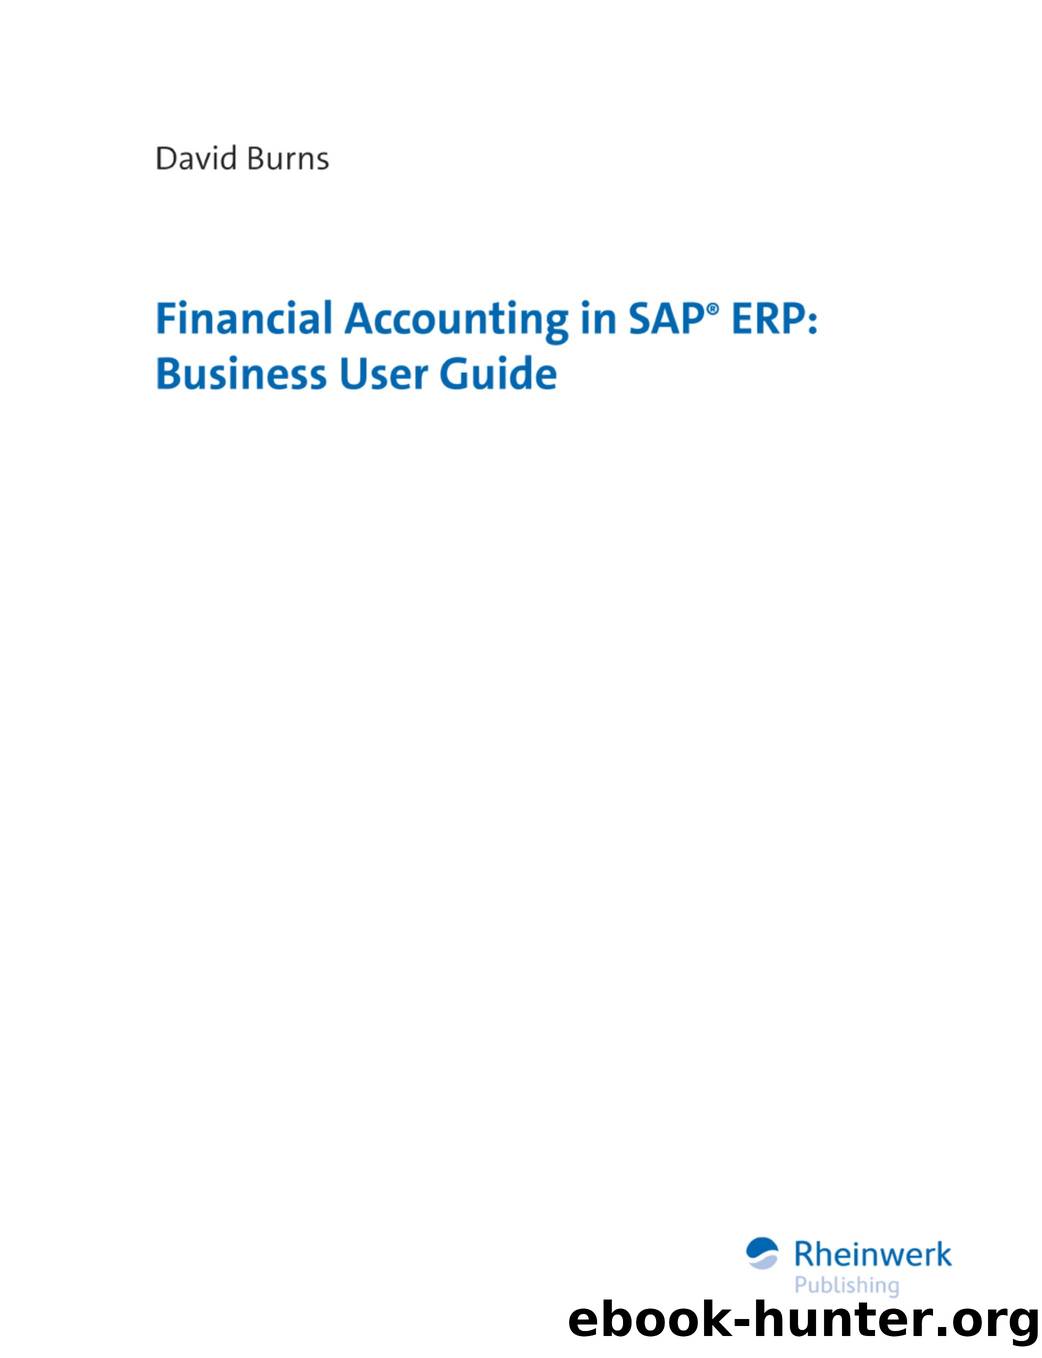 Financial Accounting in SAP ERP by Business User Guide